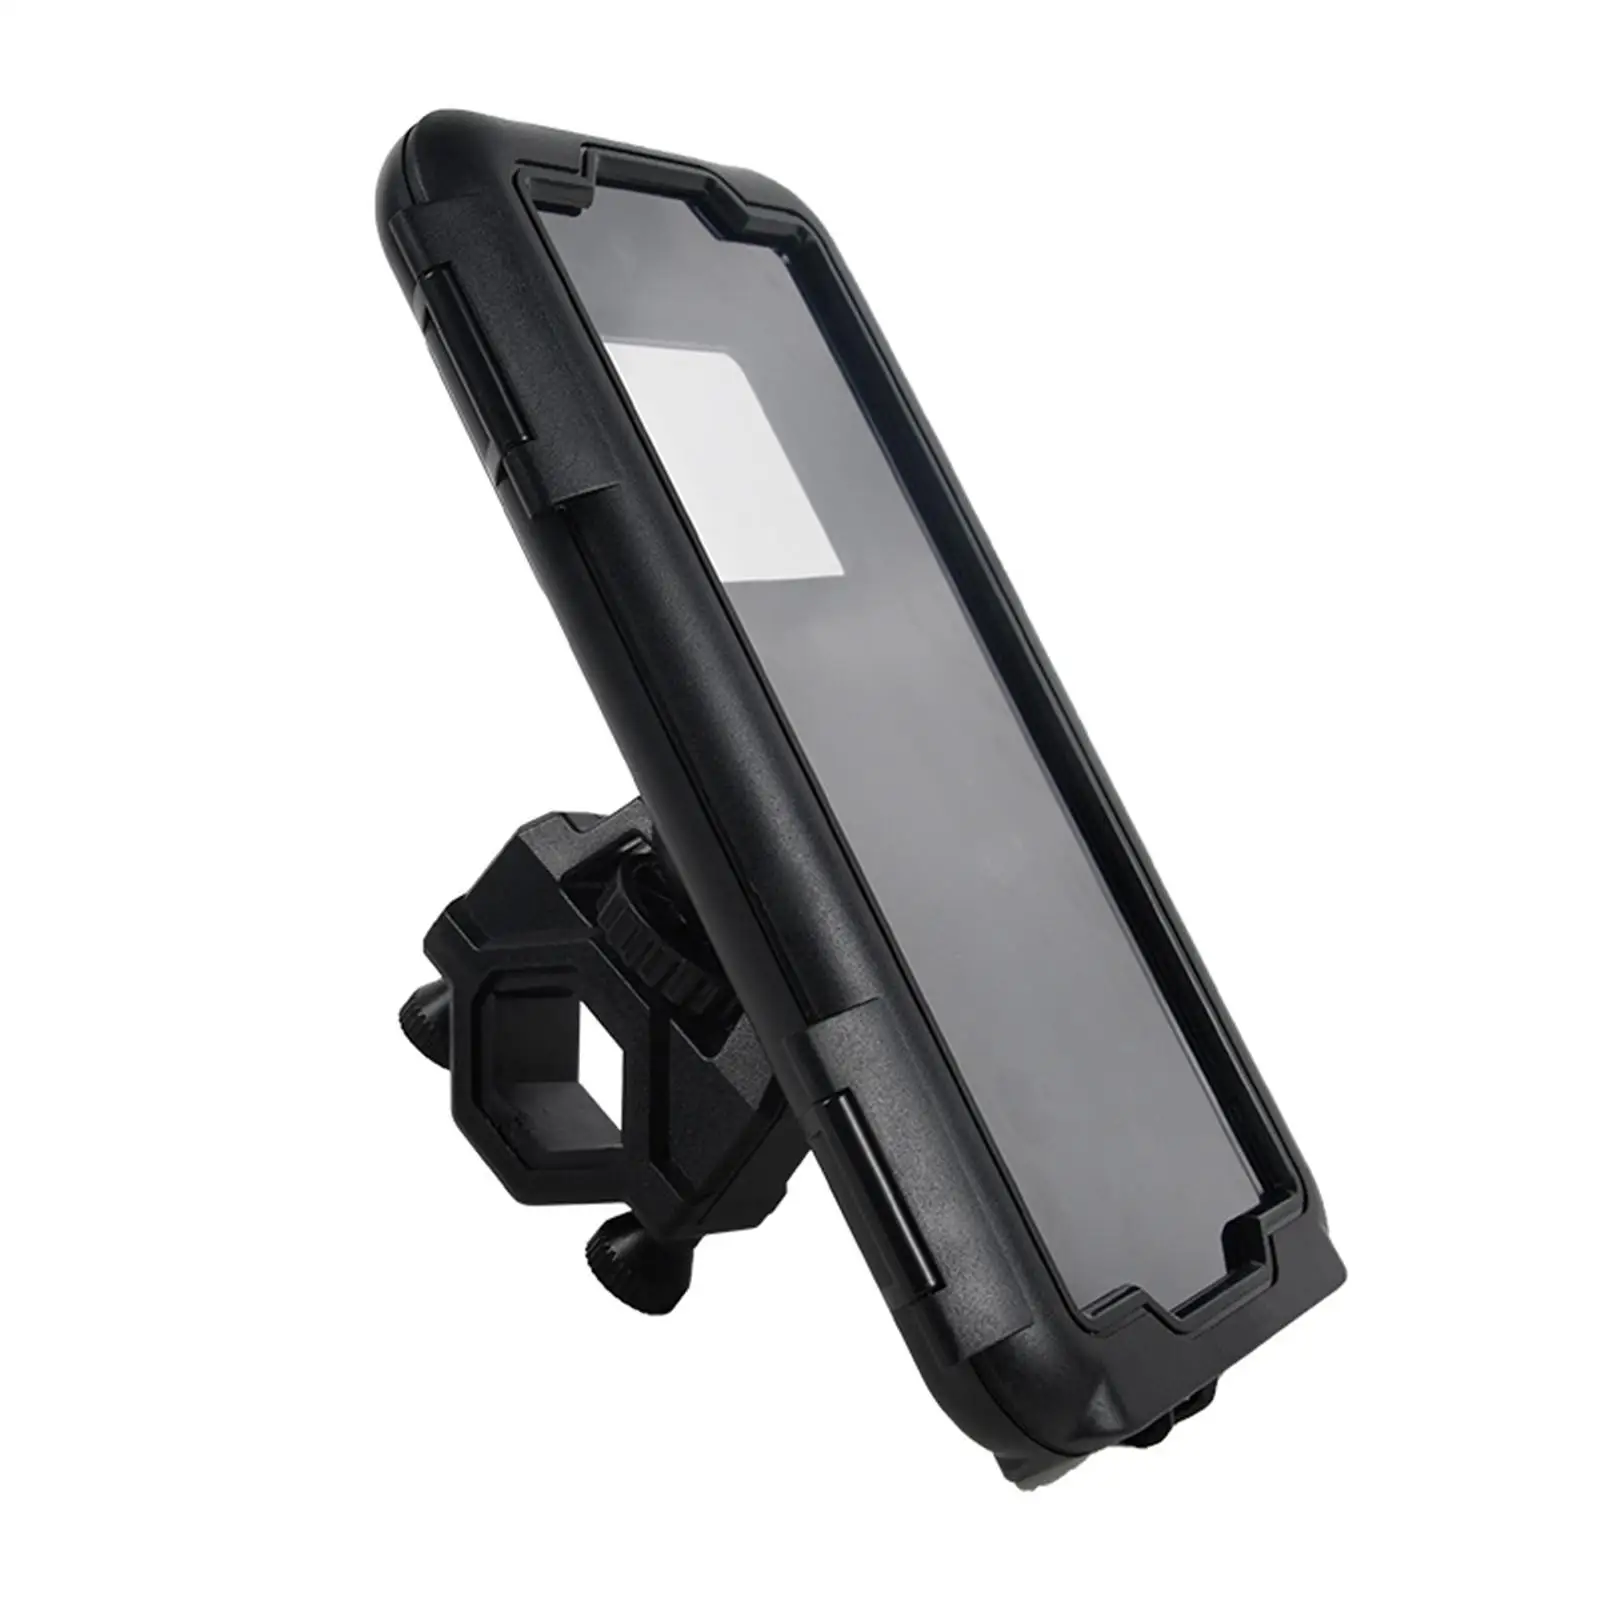  Cycling Cell Phone Bracket Water Dust Bike Phone Mount for Motorcycle Riding Scooter Hiking Phones Within 7 in